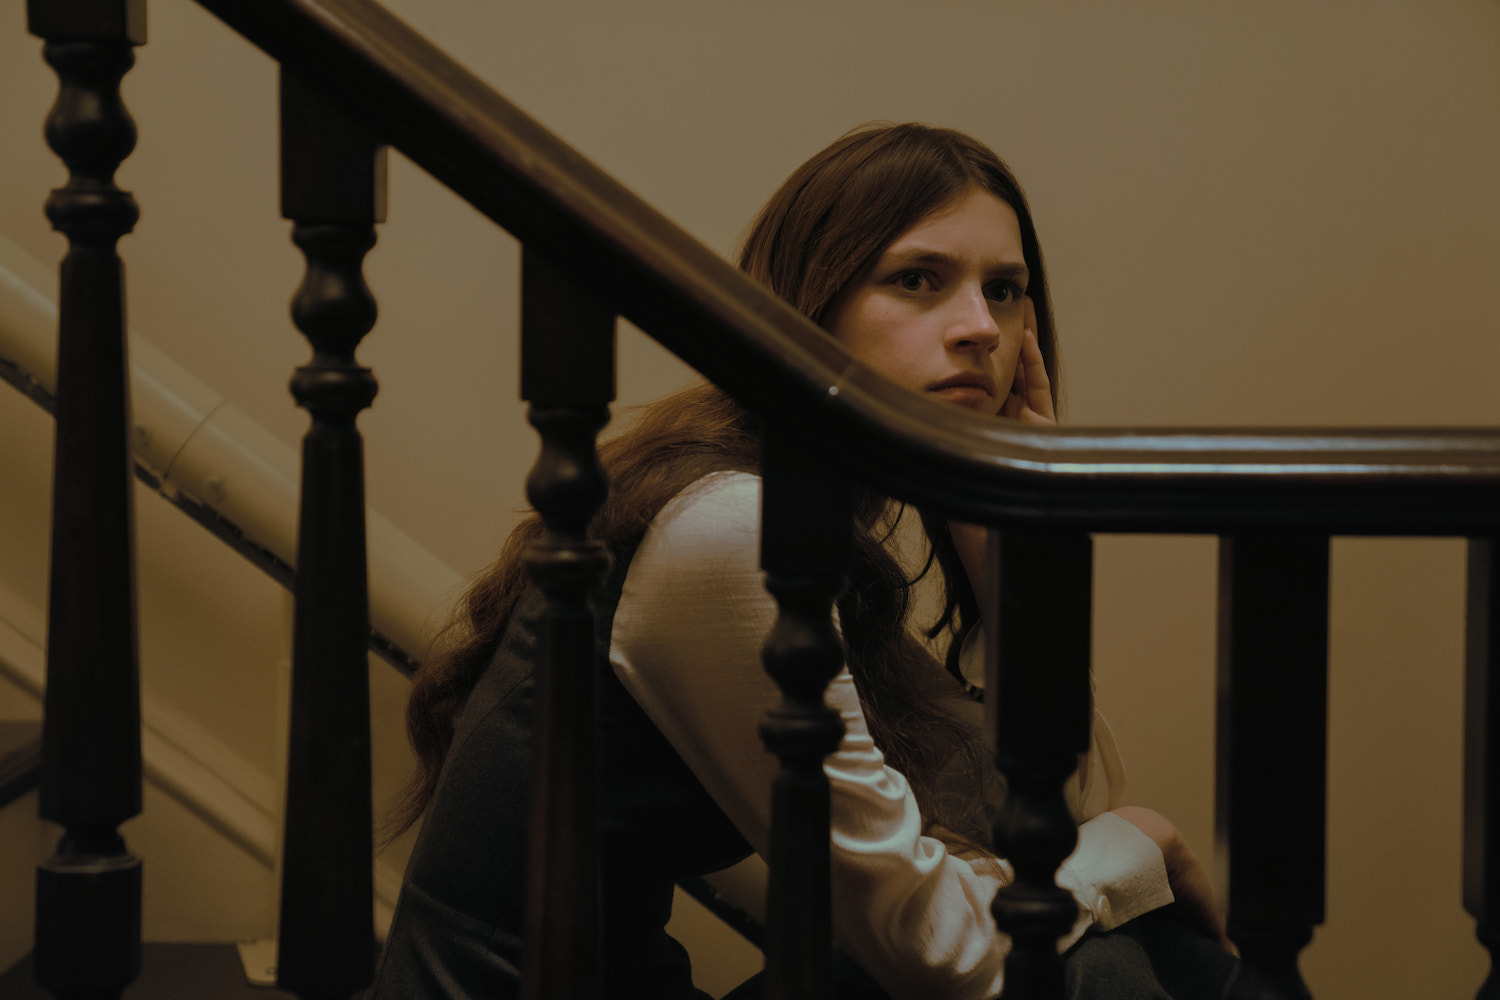 'Servant' Season 4 character Leanne, played by Nell Tiger Free, sits on a staircase looking over the railing.